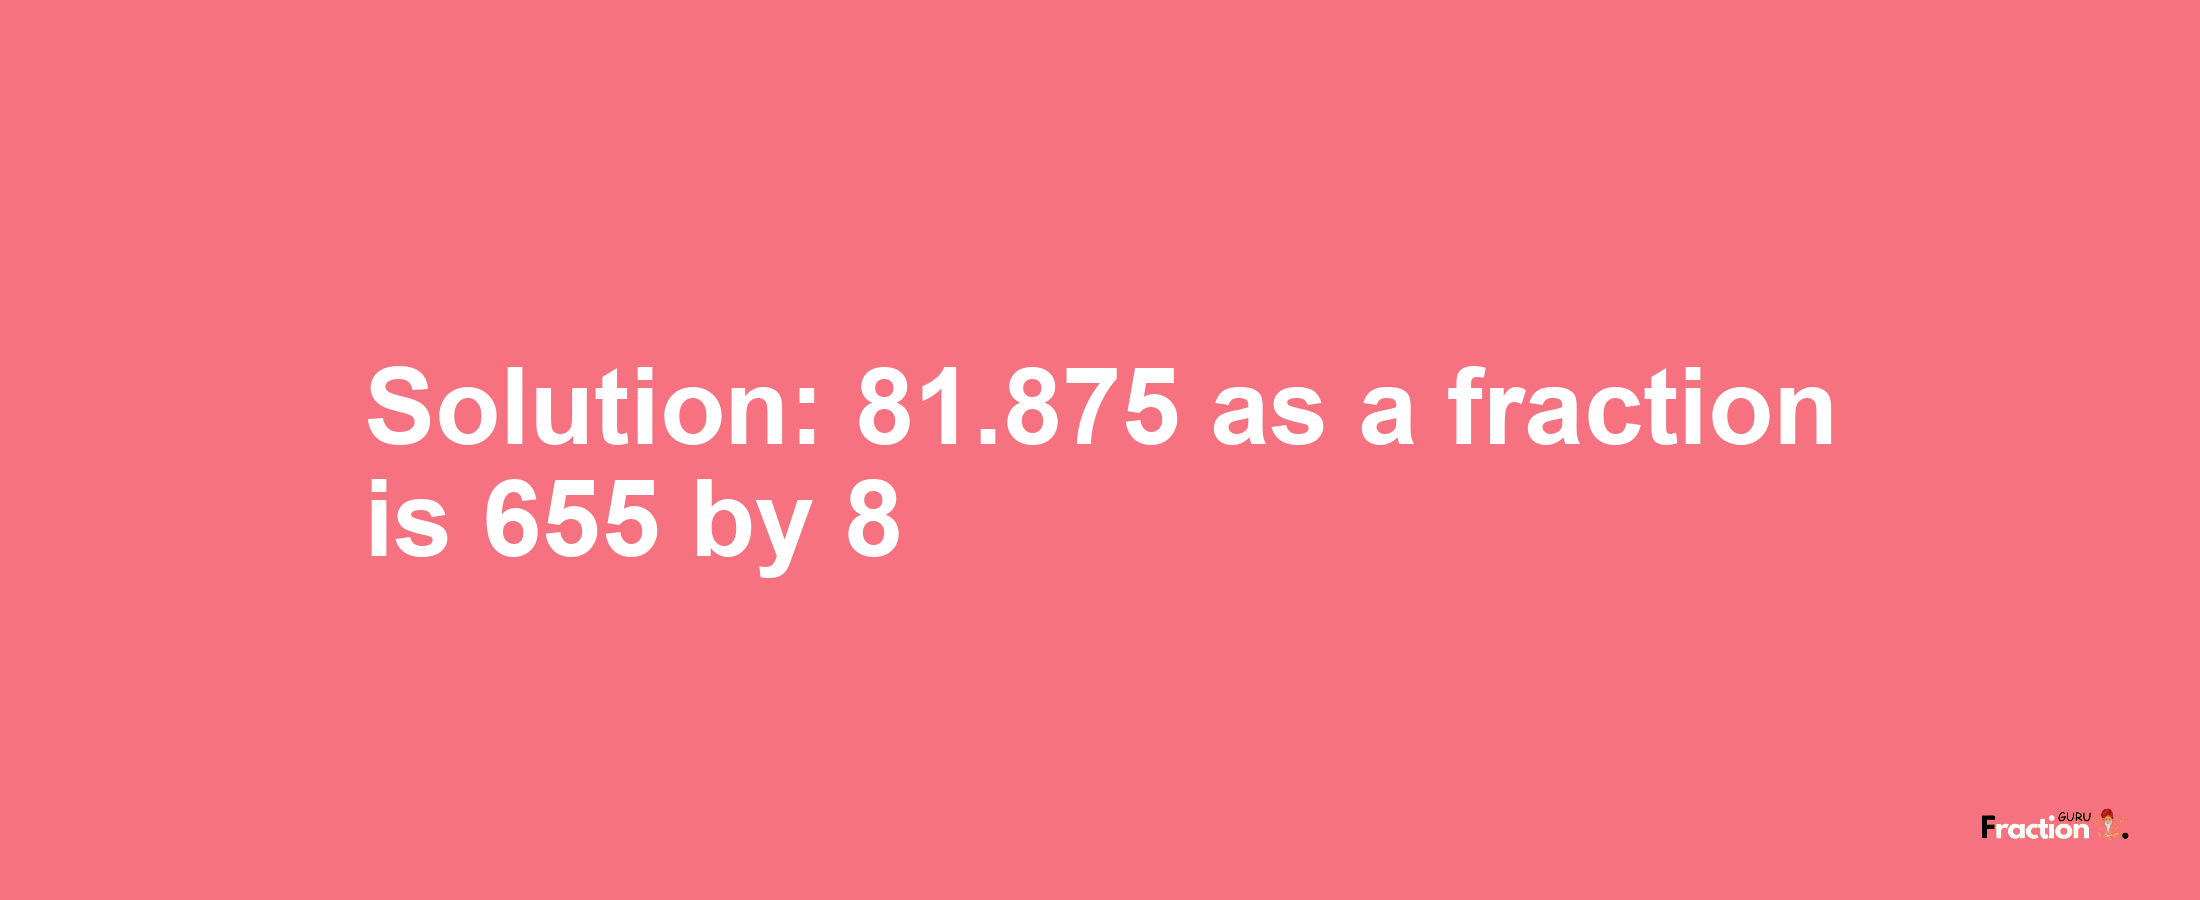 Solution:81.875 as a fraction is 655/8